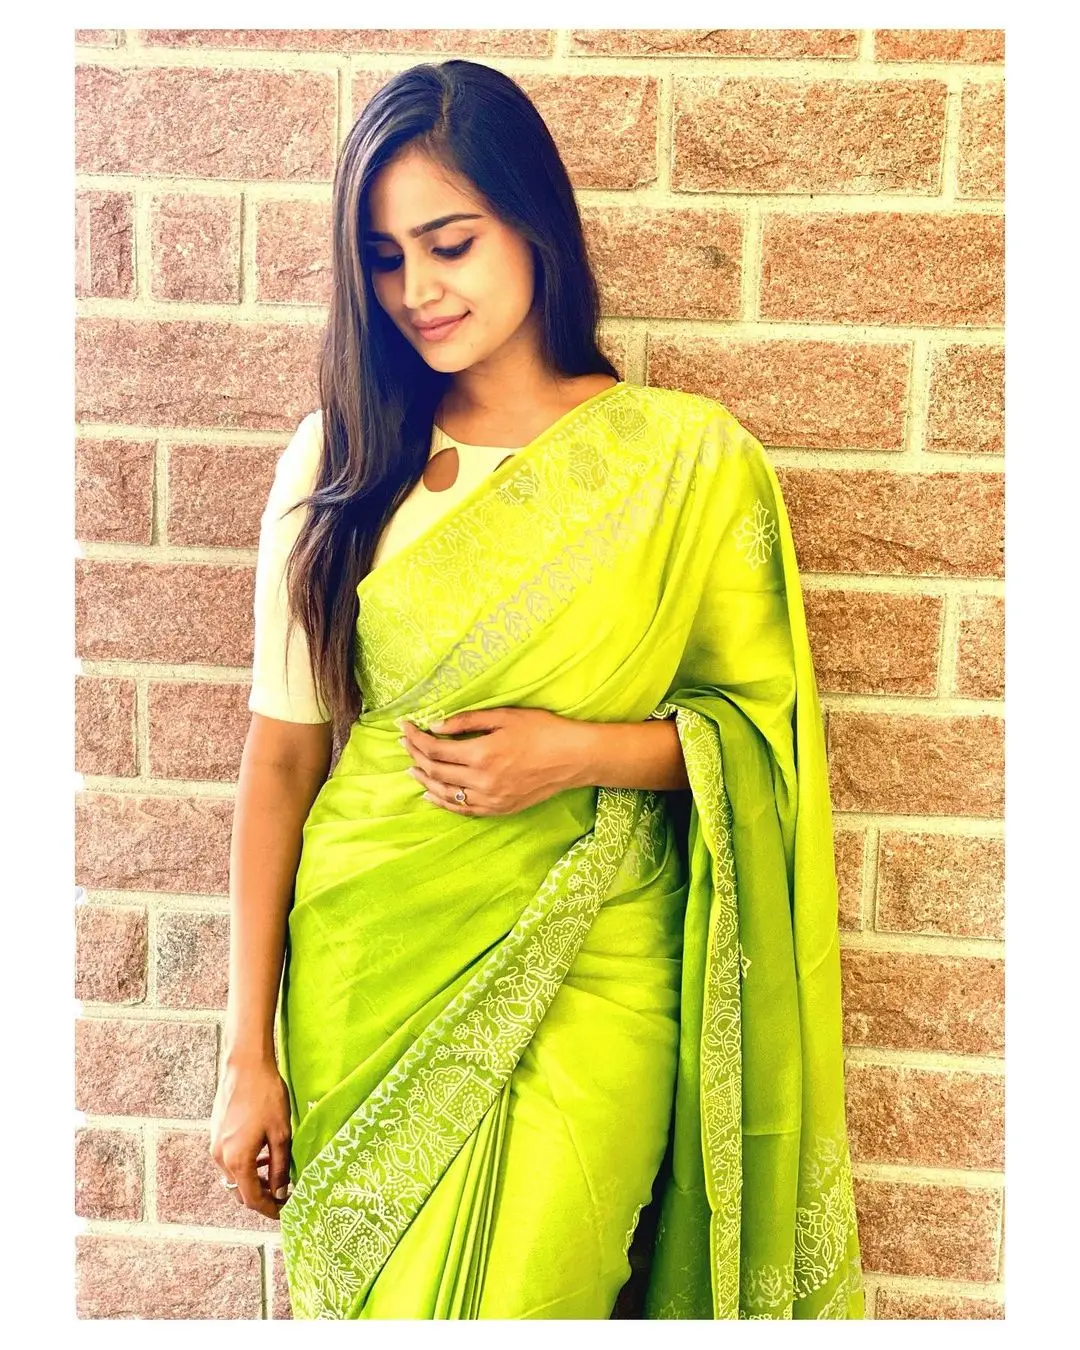 INDIAN GIRL KAVYA SHREE IN TRADITIONAL GREEN SAREE WHITE BLOUSE 6